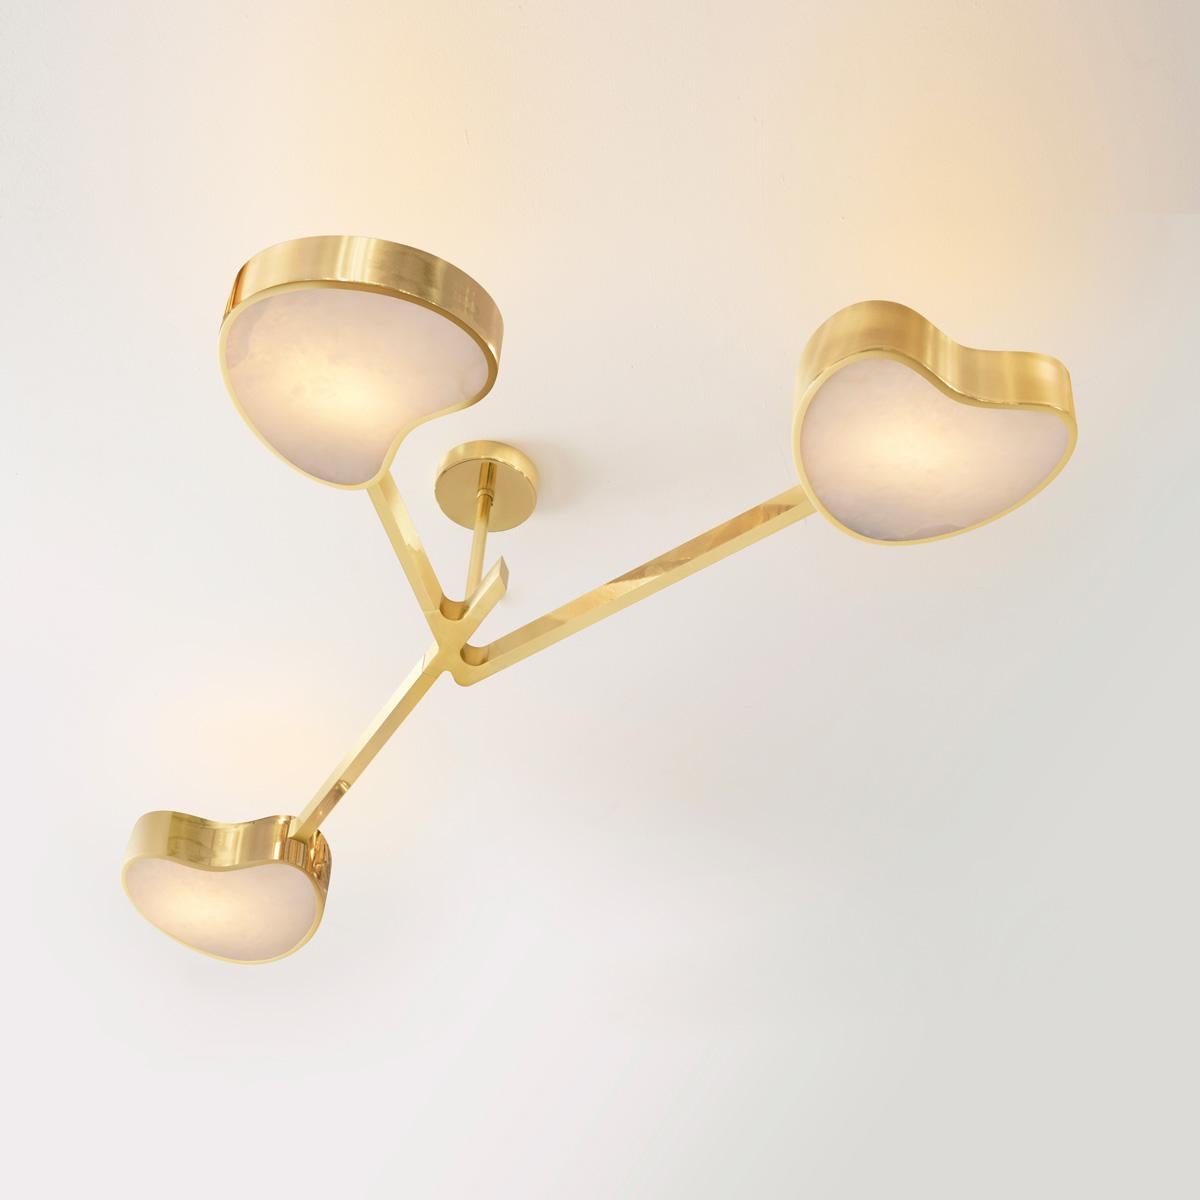 Brass Cuore N.3 Ceiling Light by Gaspare Asaro. Bronze Finish For Sale